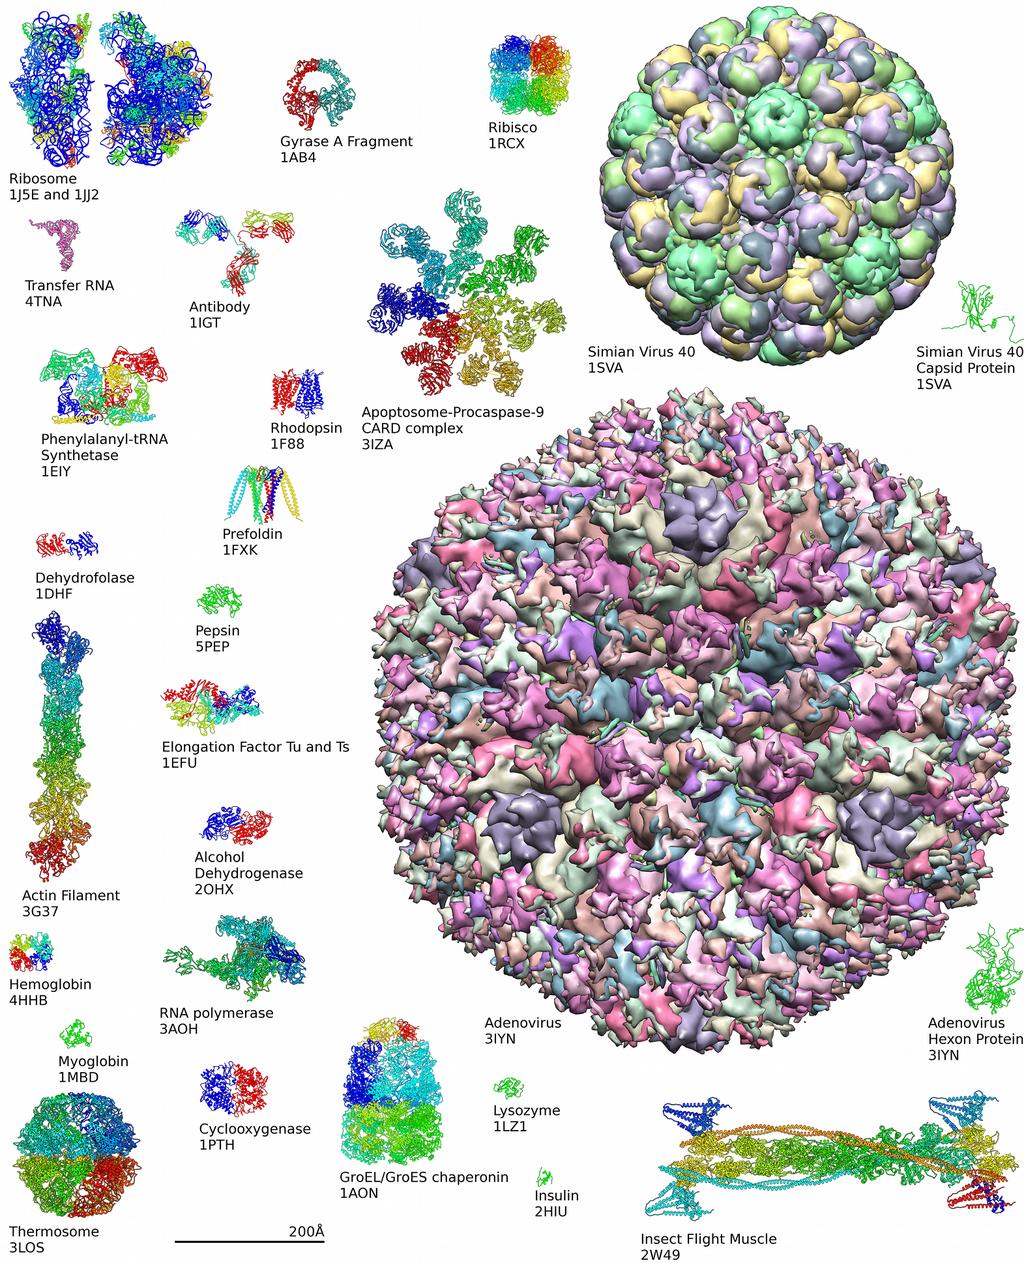 Protein Data Bank (PDB), 2017 ~126,000 structures ~ 30 % of partial coverage of human proteins 12% coverage by sequence 83% Xray crystallography 8% Nuclear Magnetic Resonance Crystallographic density